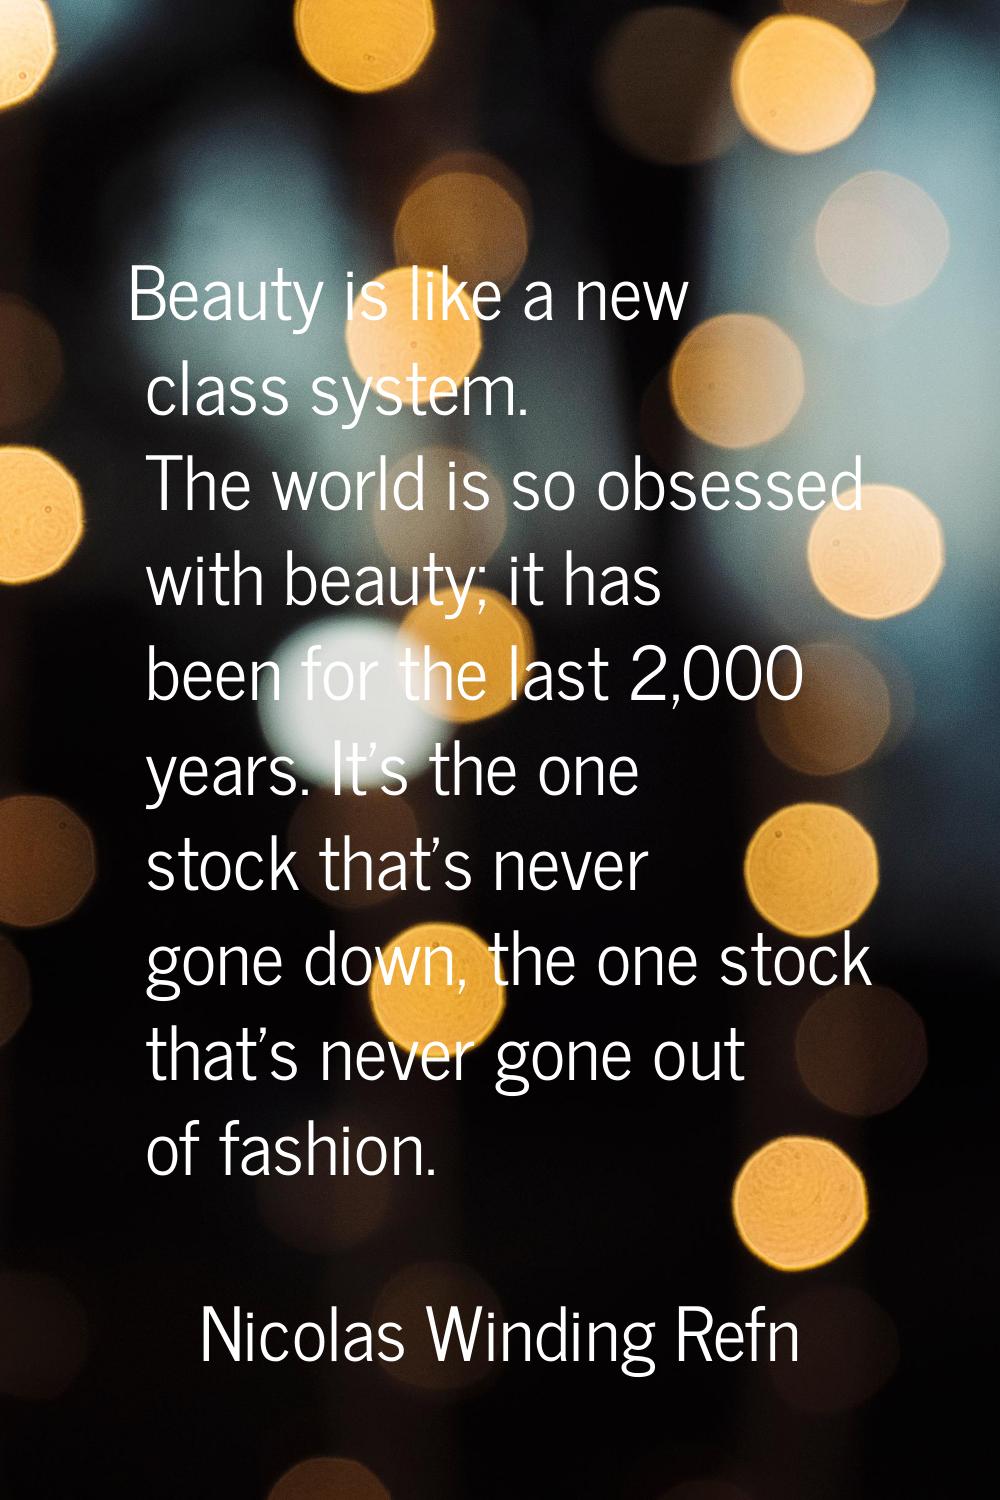 Beauty is like a new class system. The world is so obsessed with beauty; it has been for the last 2